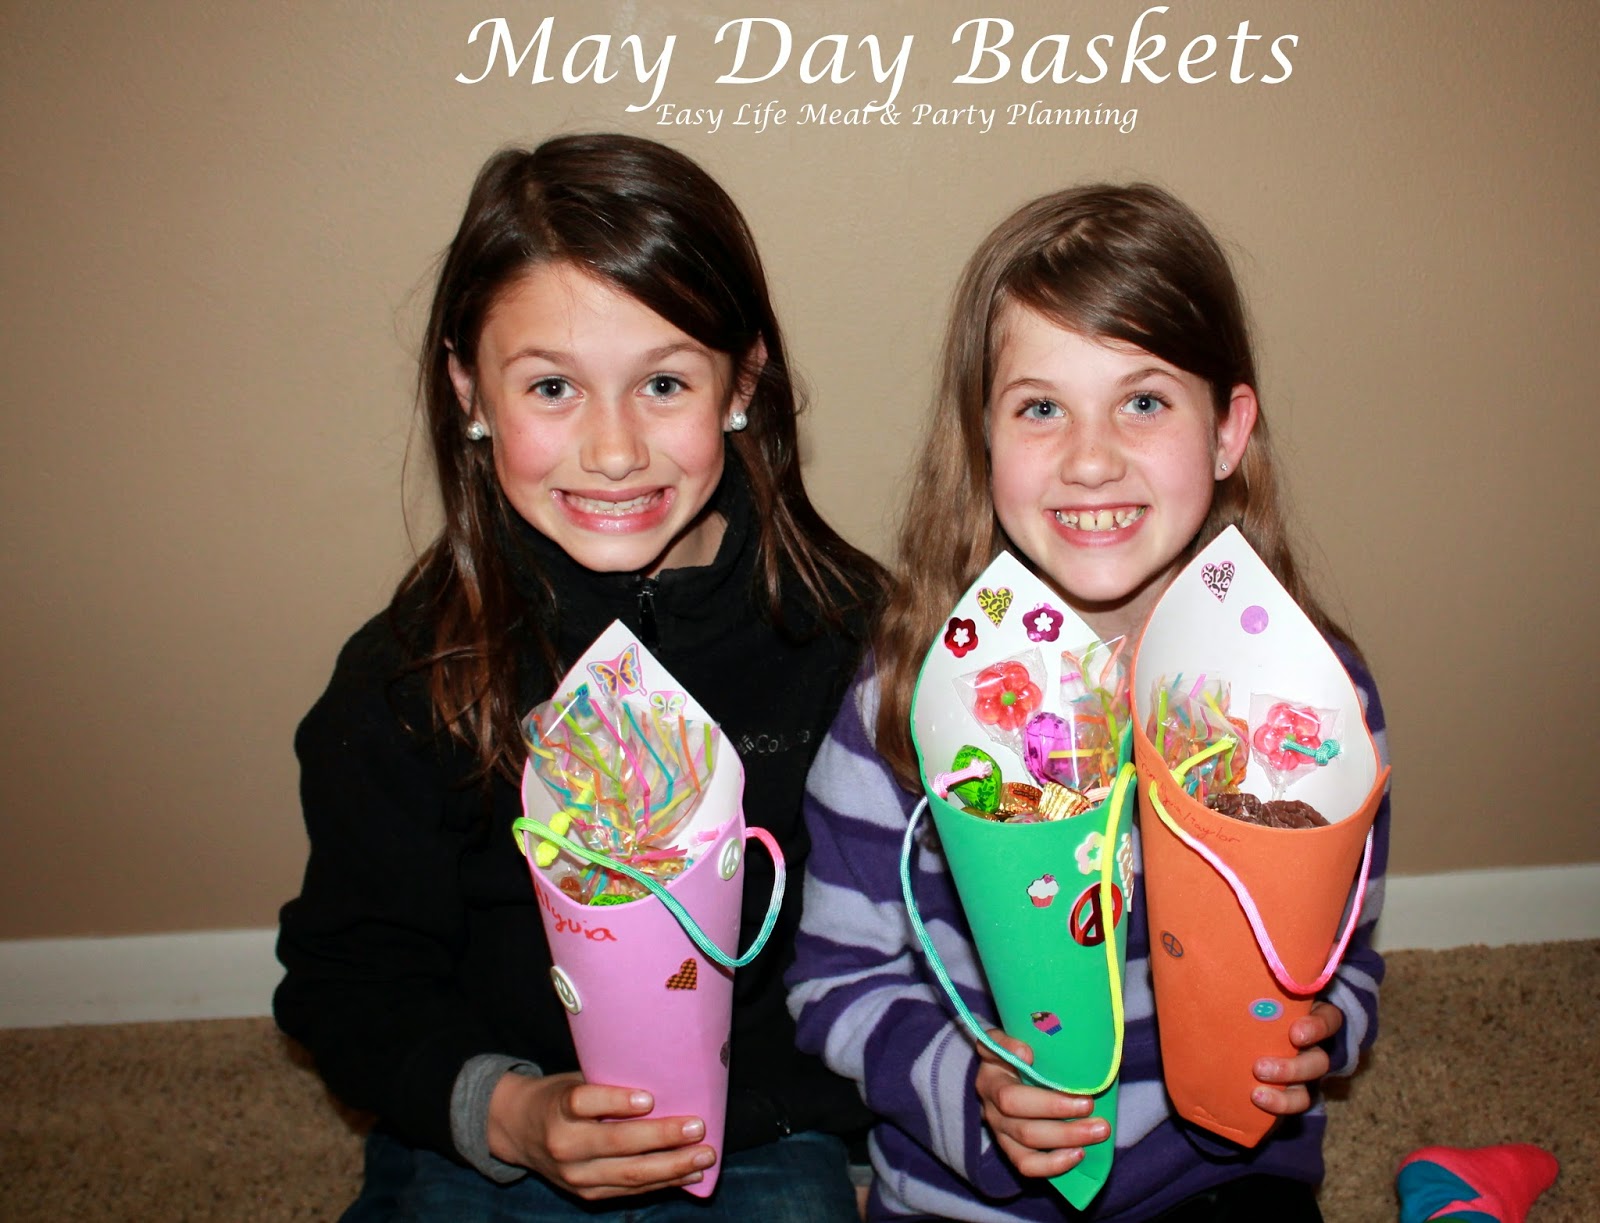 May Day Baskets - Easy Life Meal & Party Planning